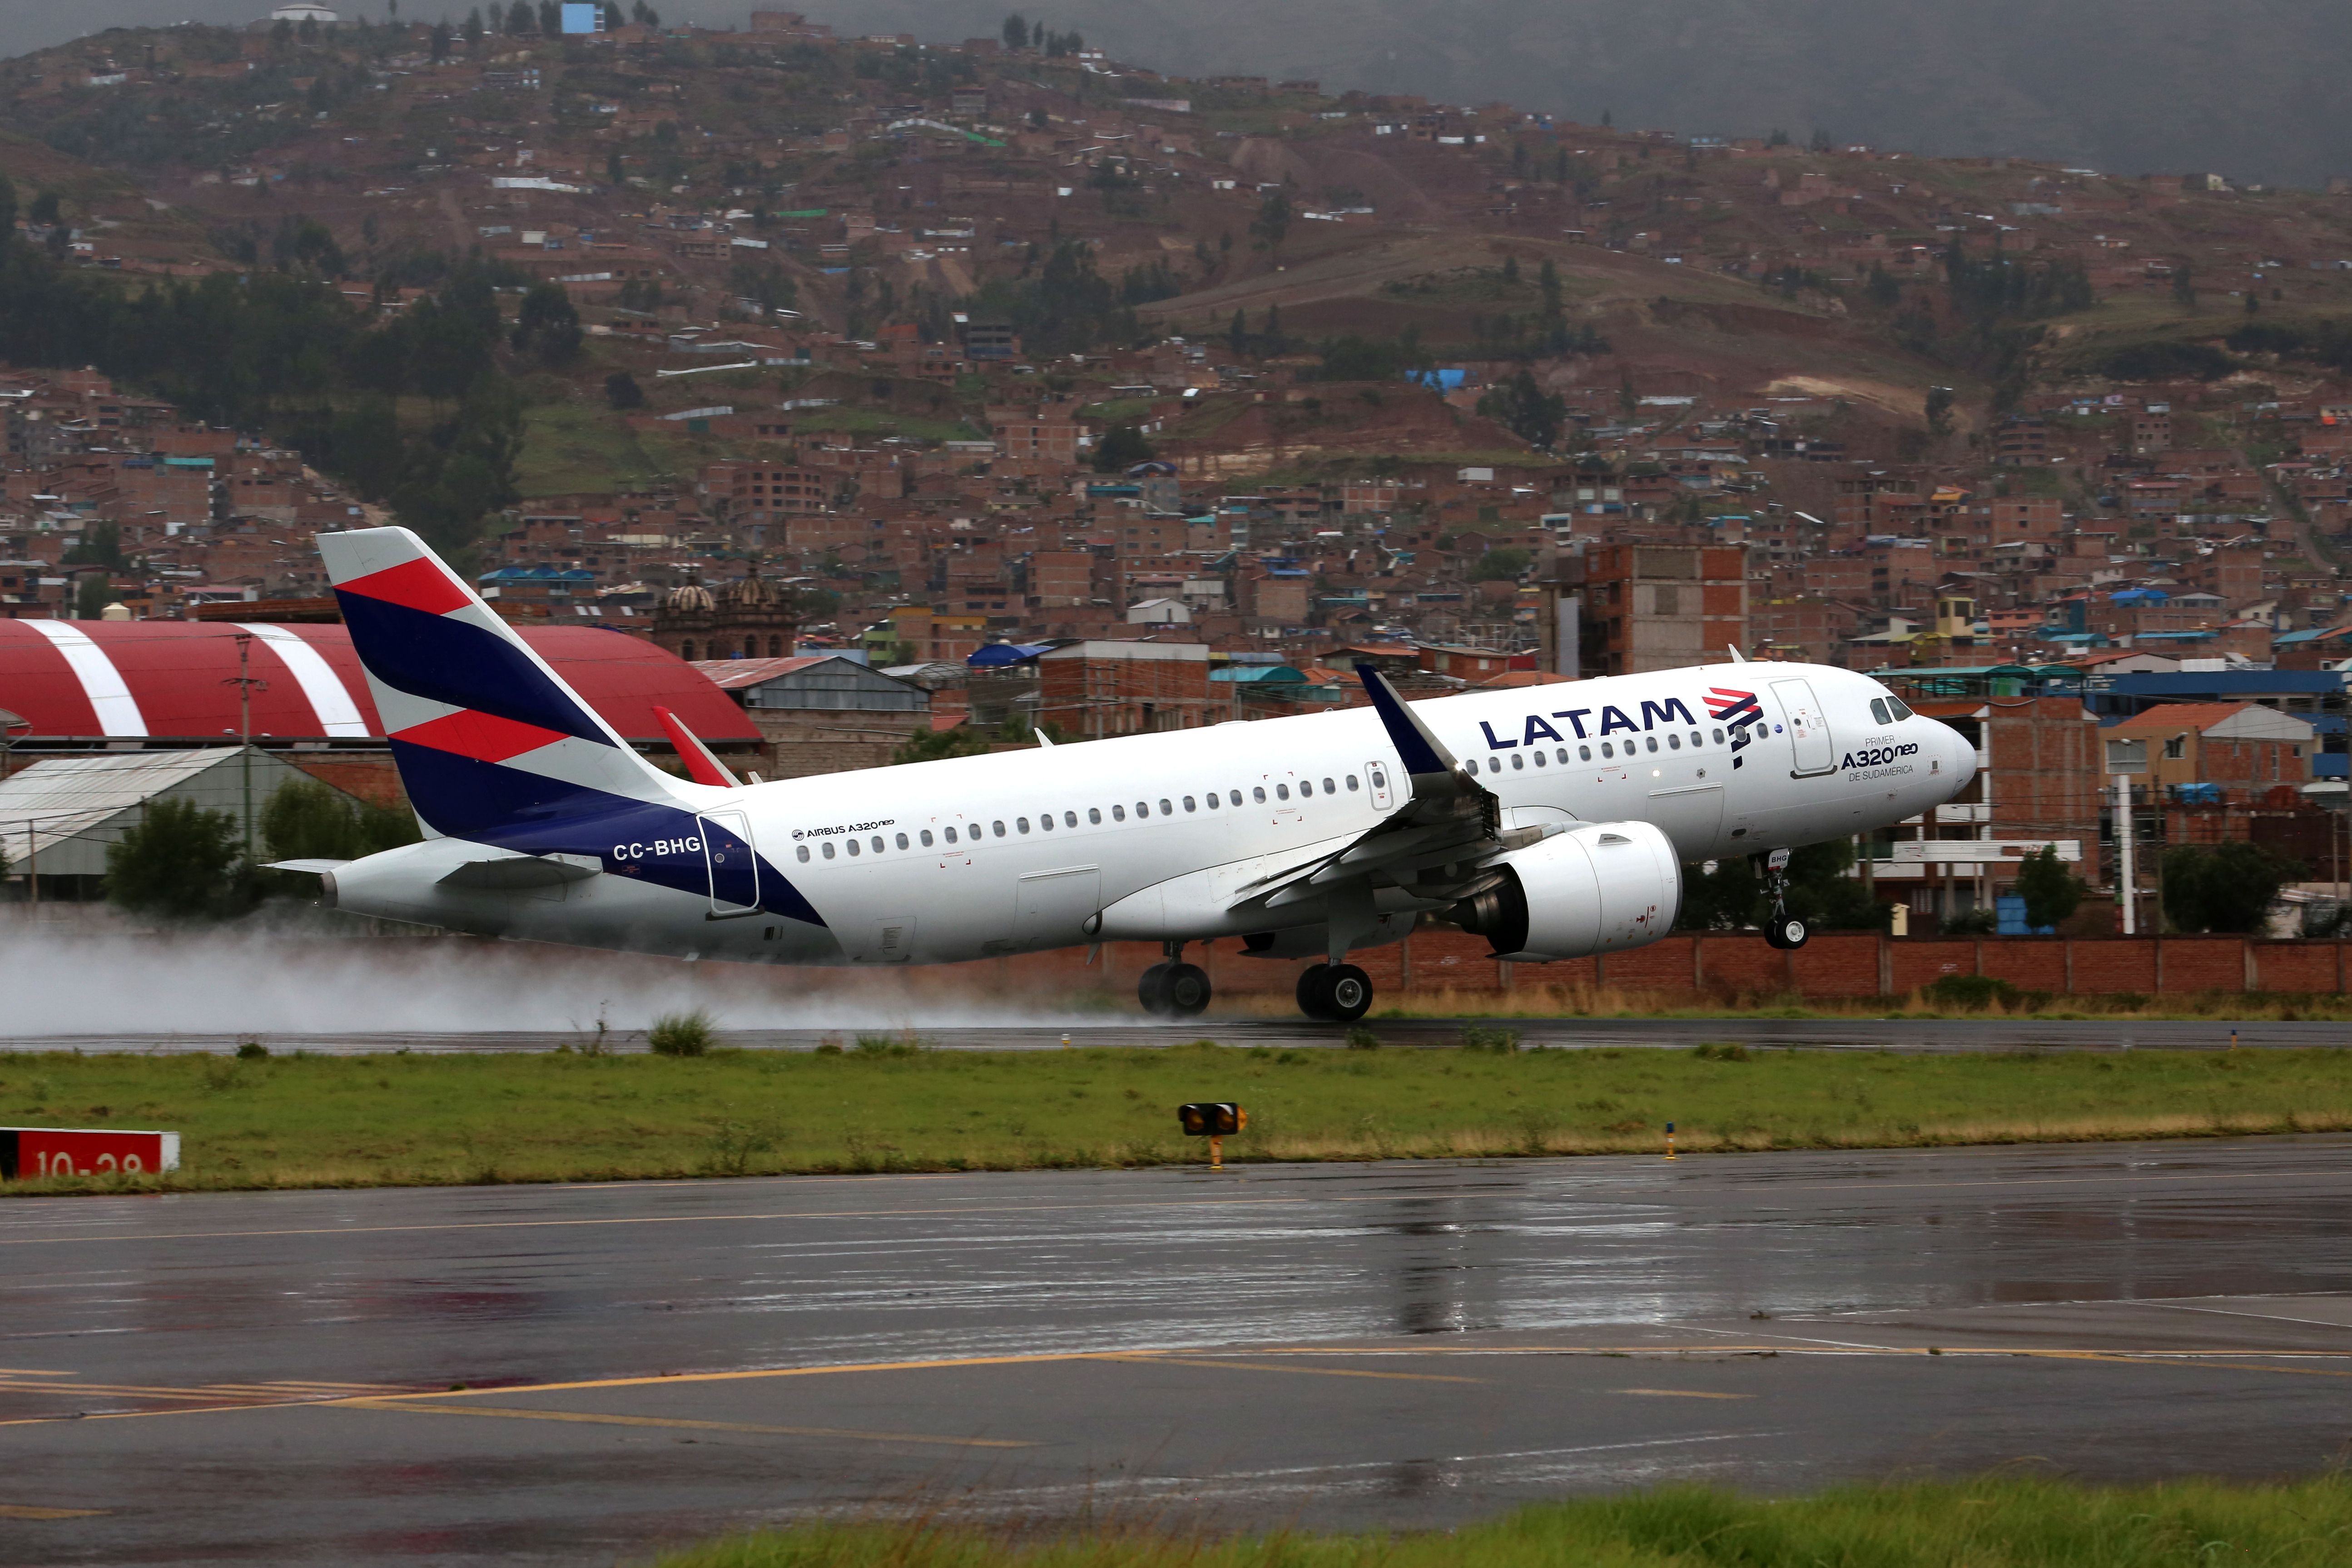 A LATAM Airbus A320 departing from Cusco